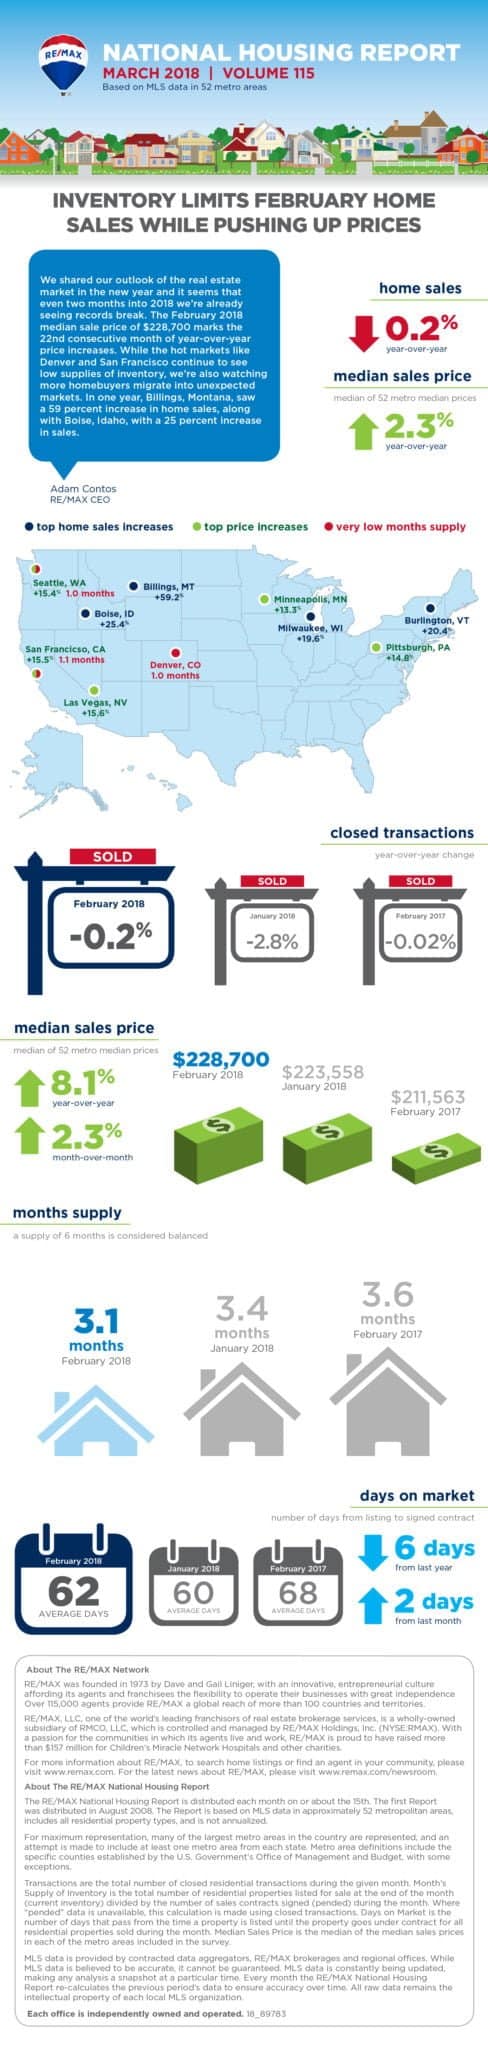 March 2018 RE/MAX National Housing Report